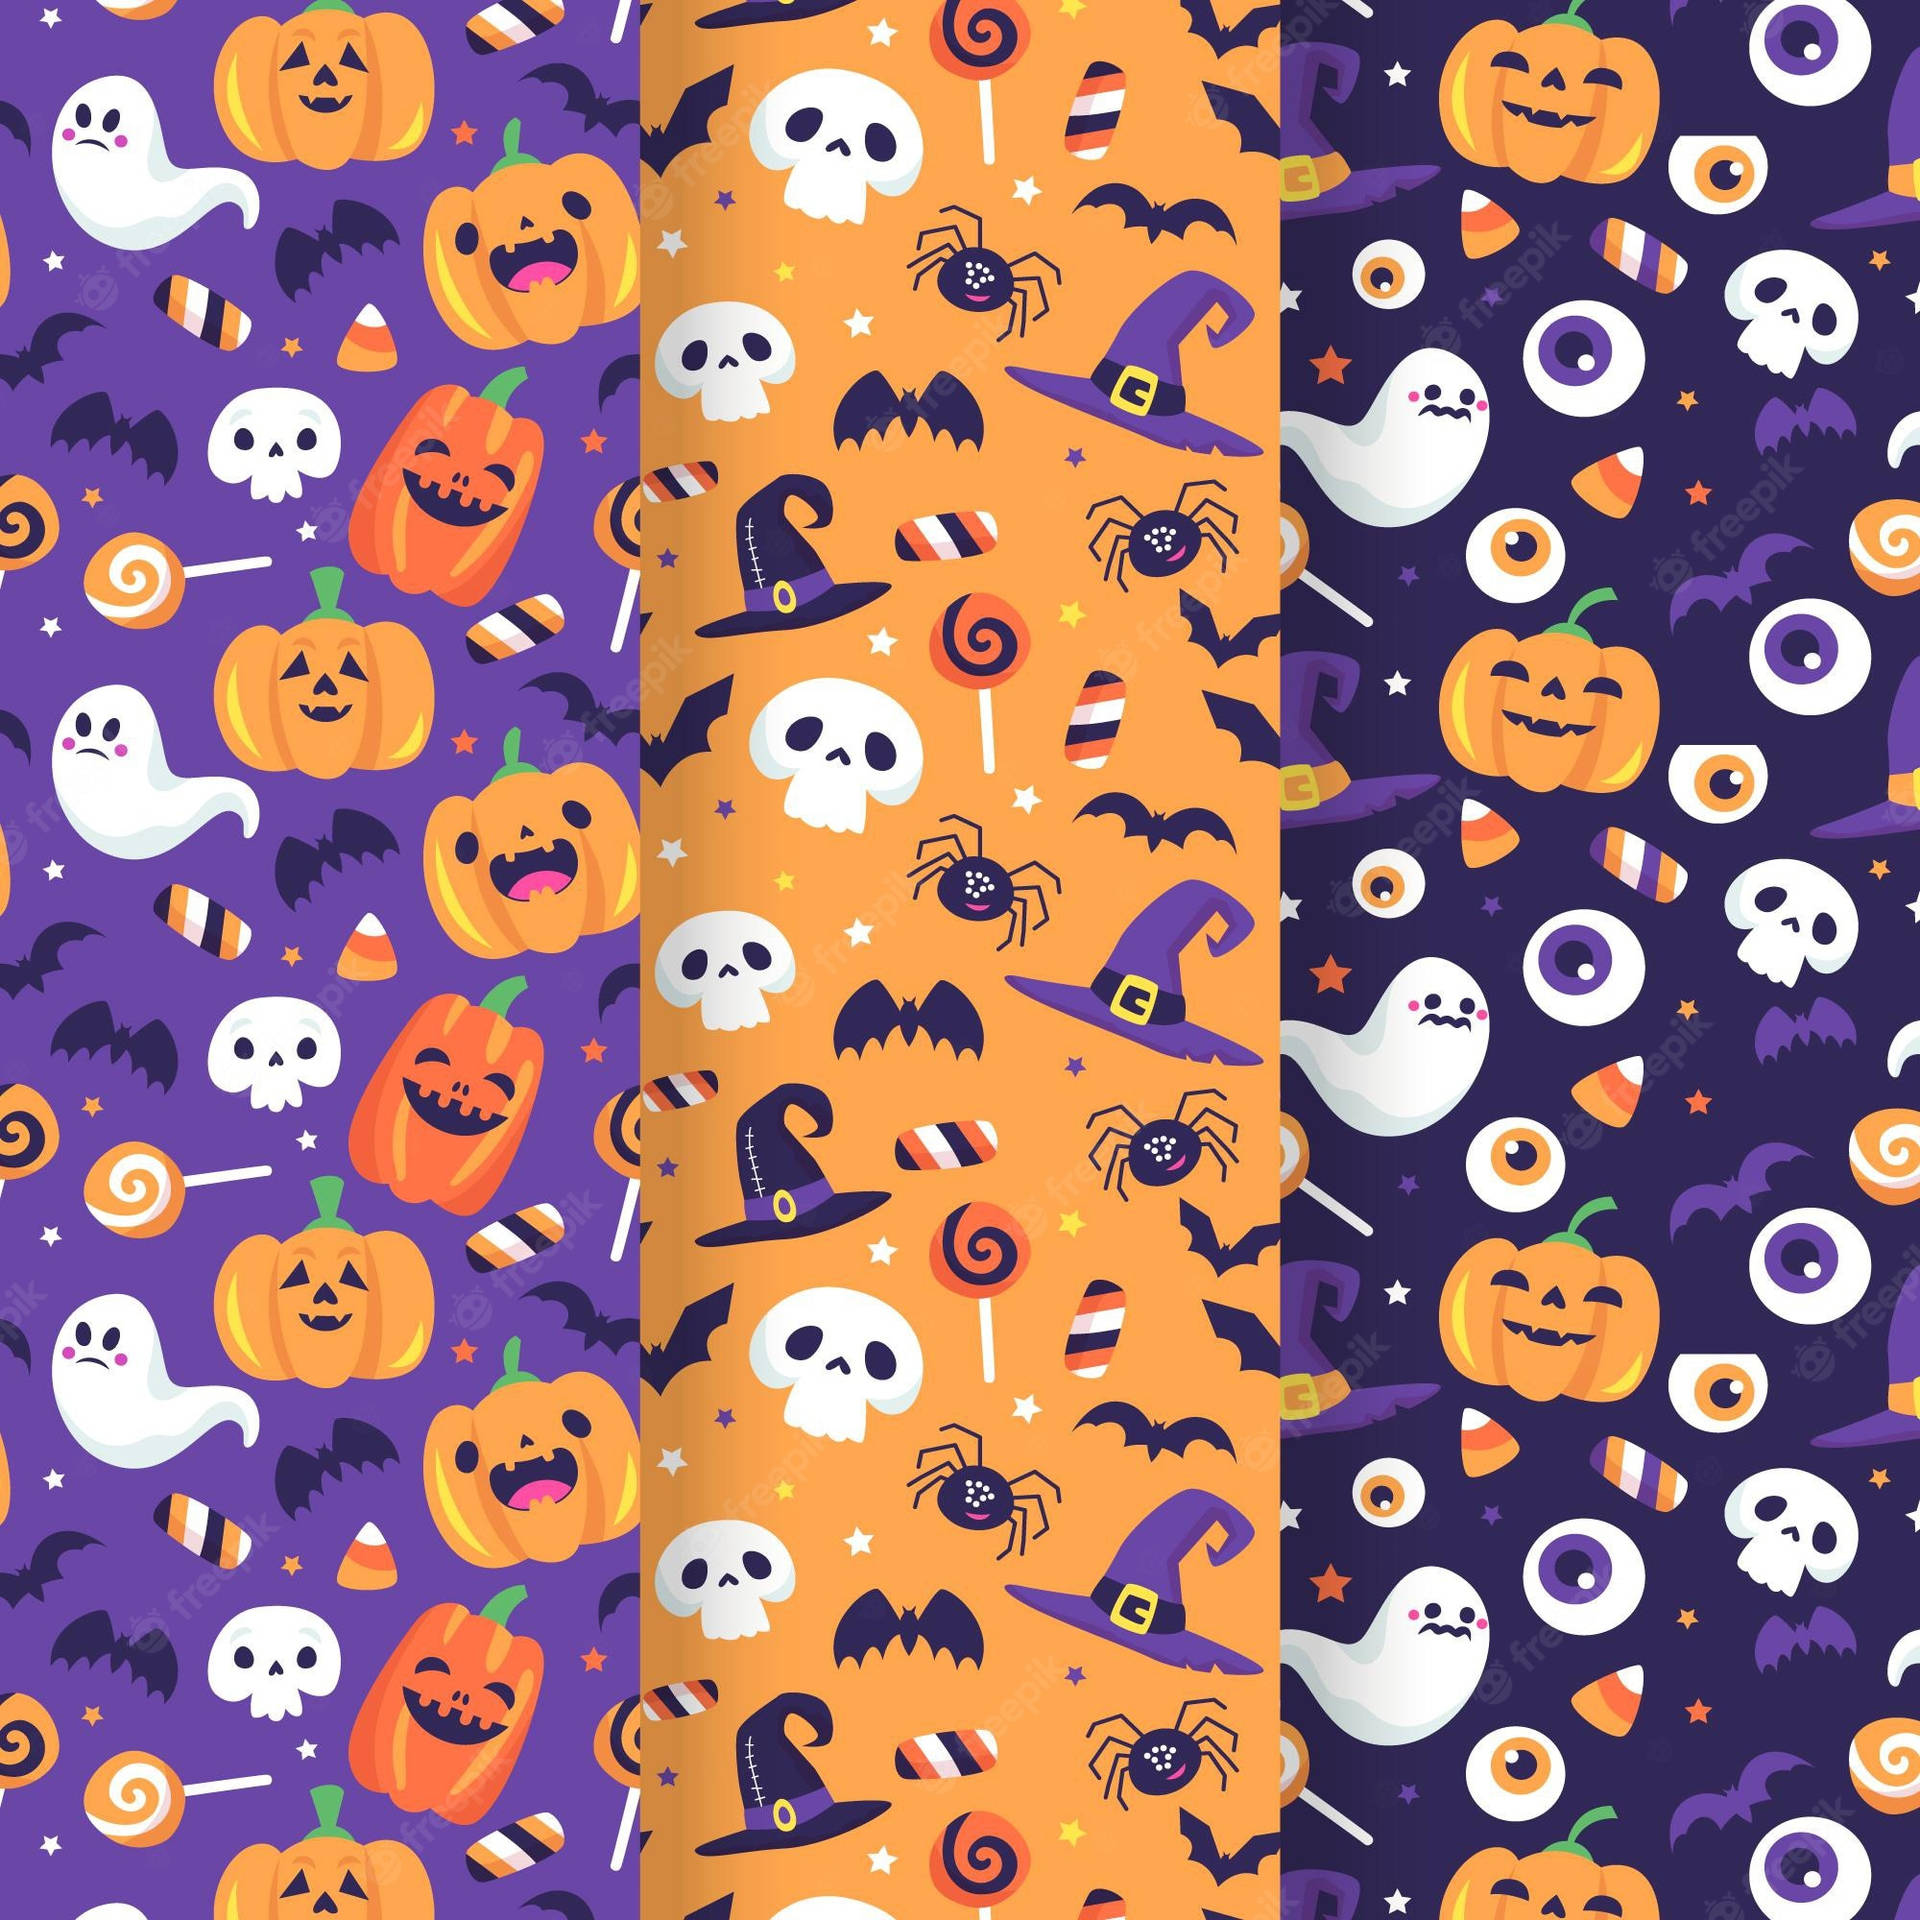 Enjoy the spirit of Halloween with this festive phone! Wallpaper